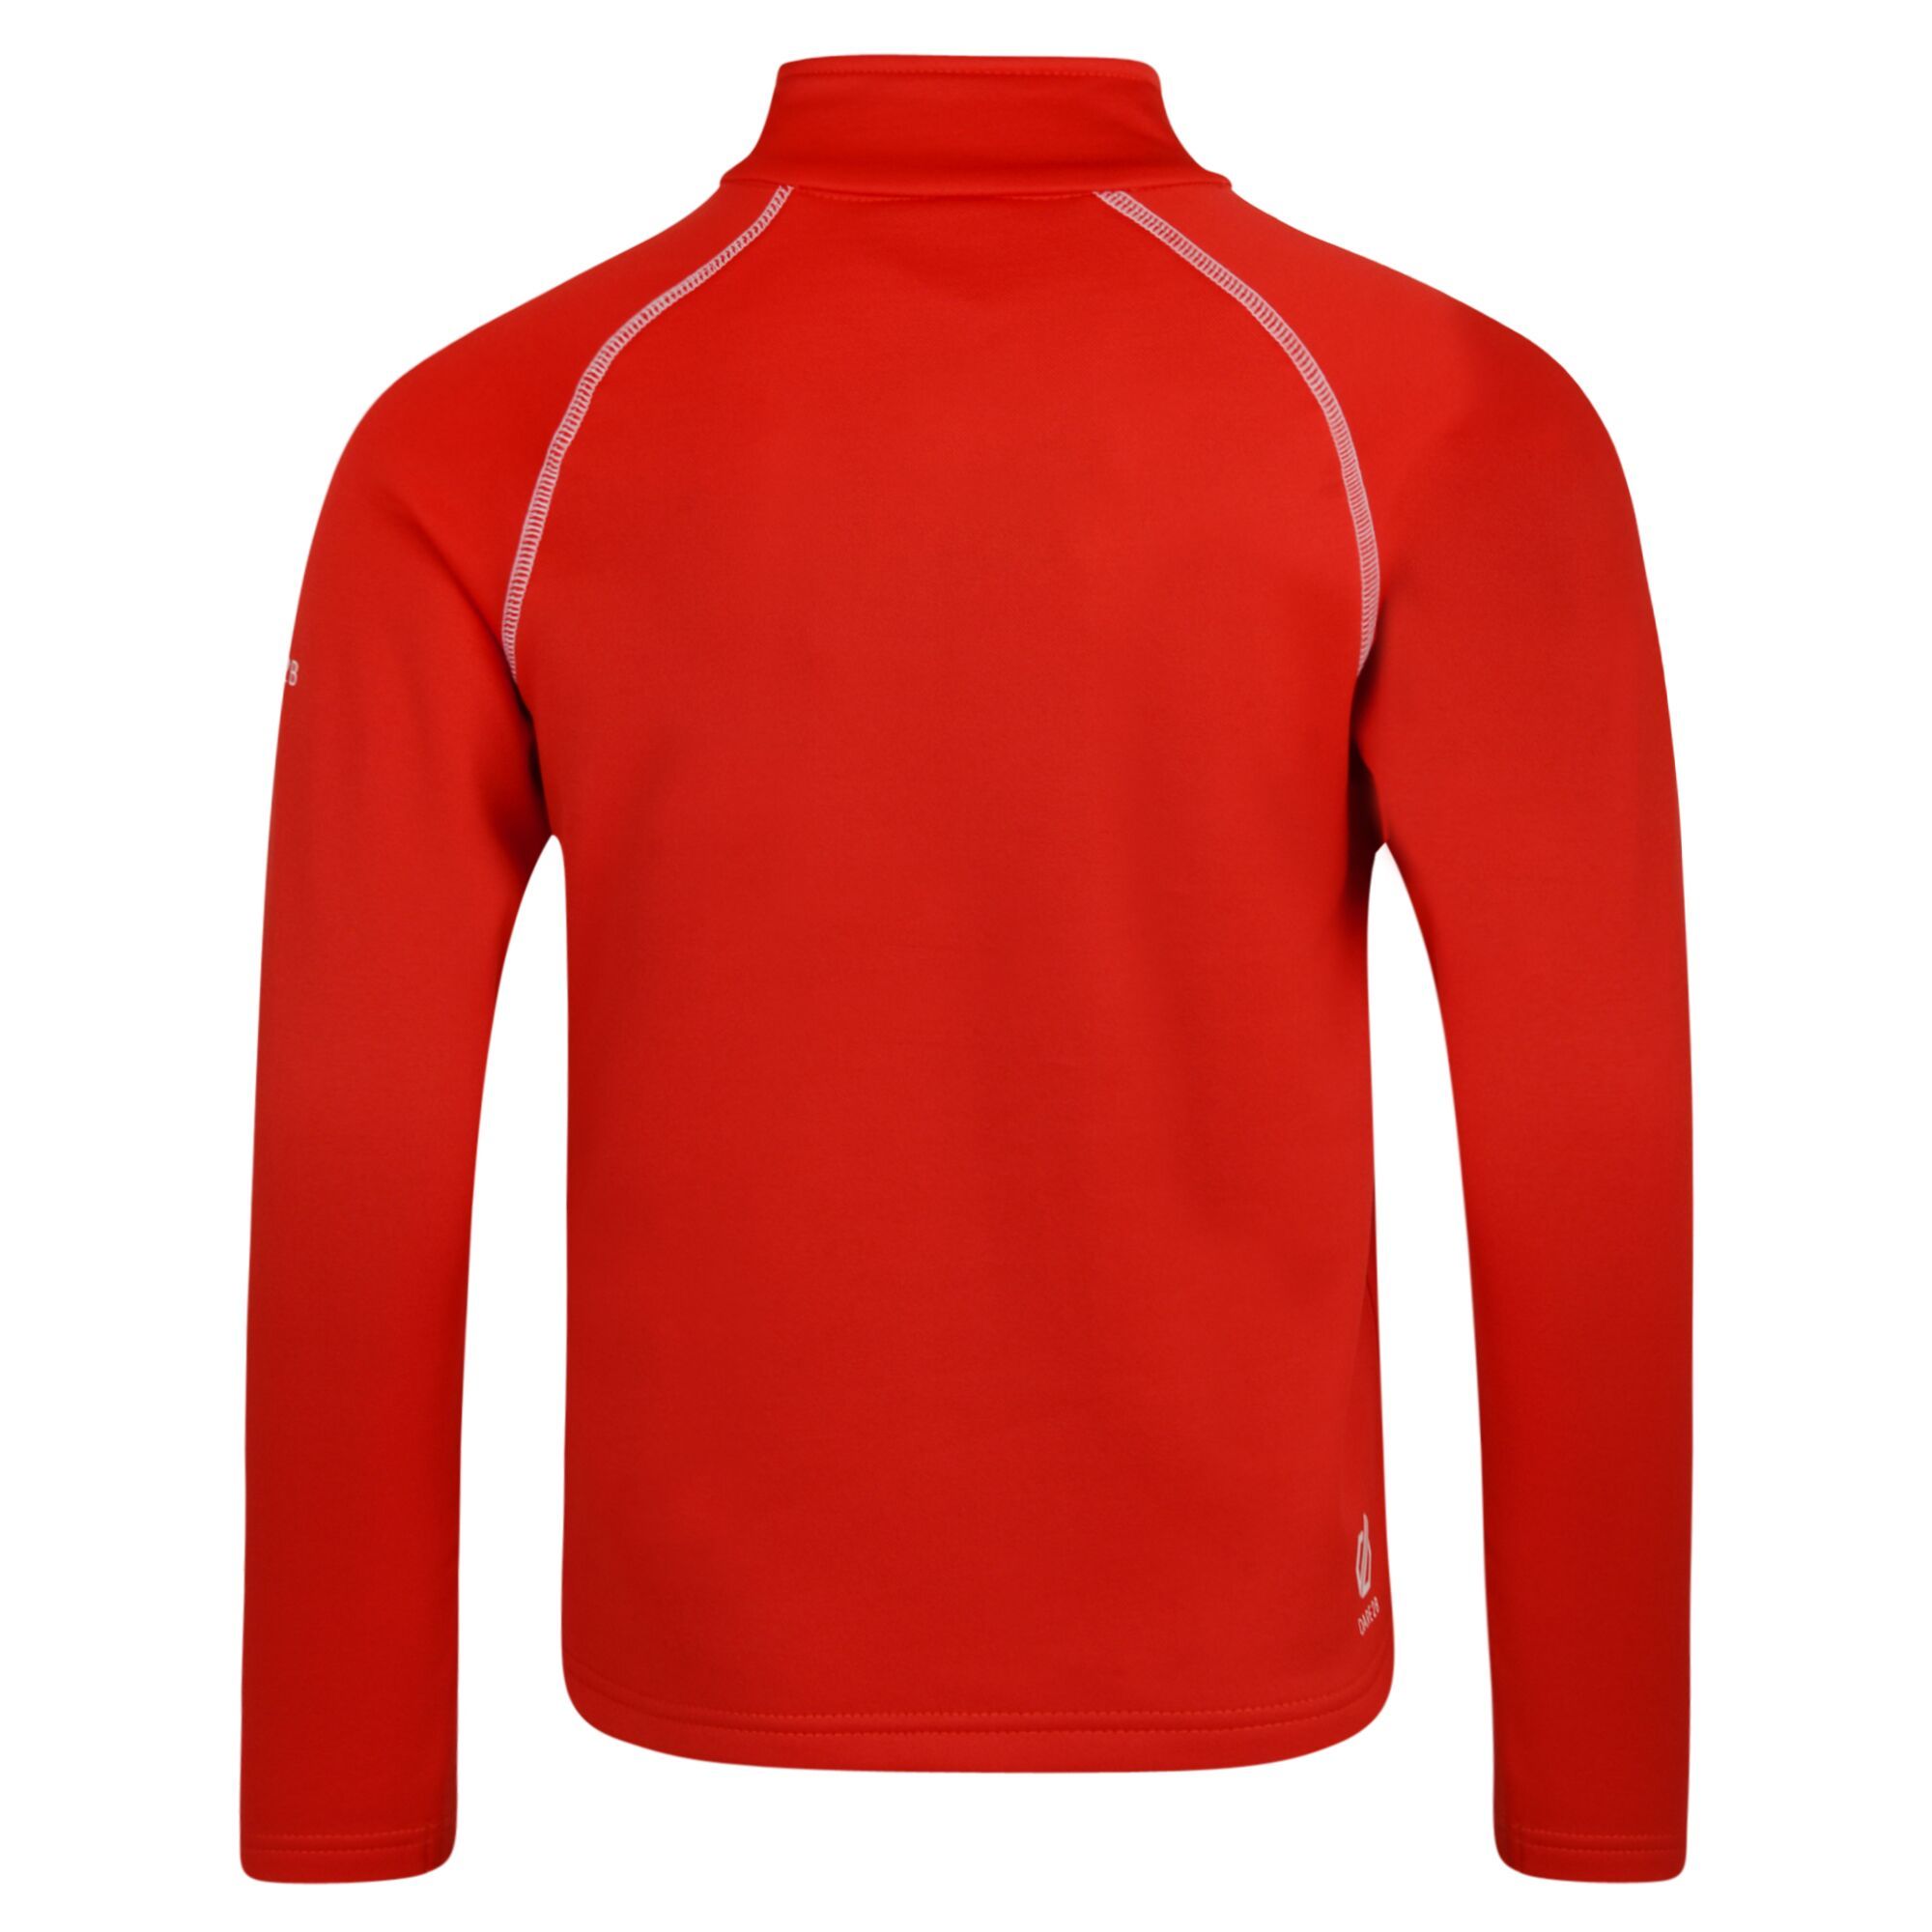 100% Polyester. Ilus core warm backed knitted stretch fabric. Quick drying. Half length zip with inner zip and chin guard.